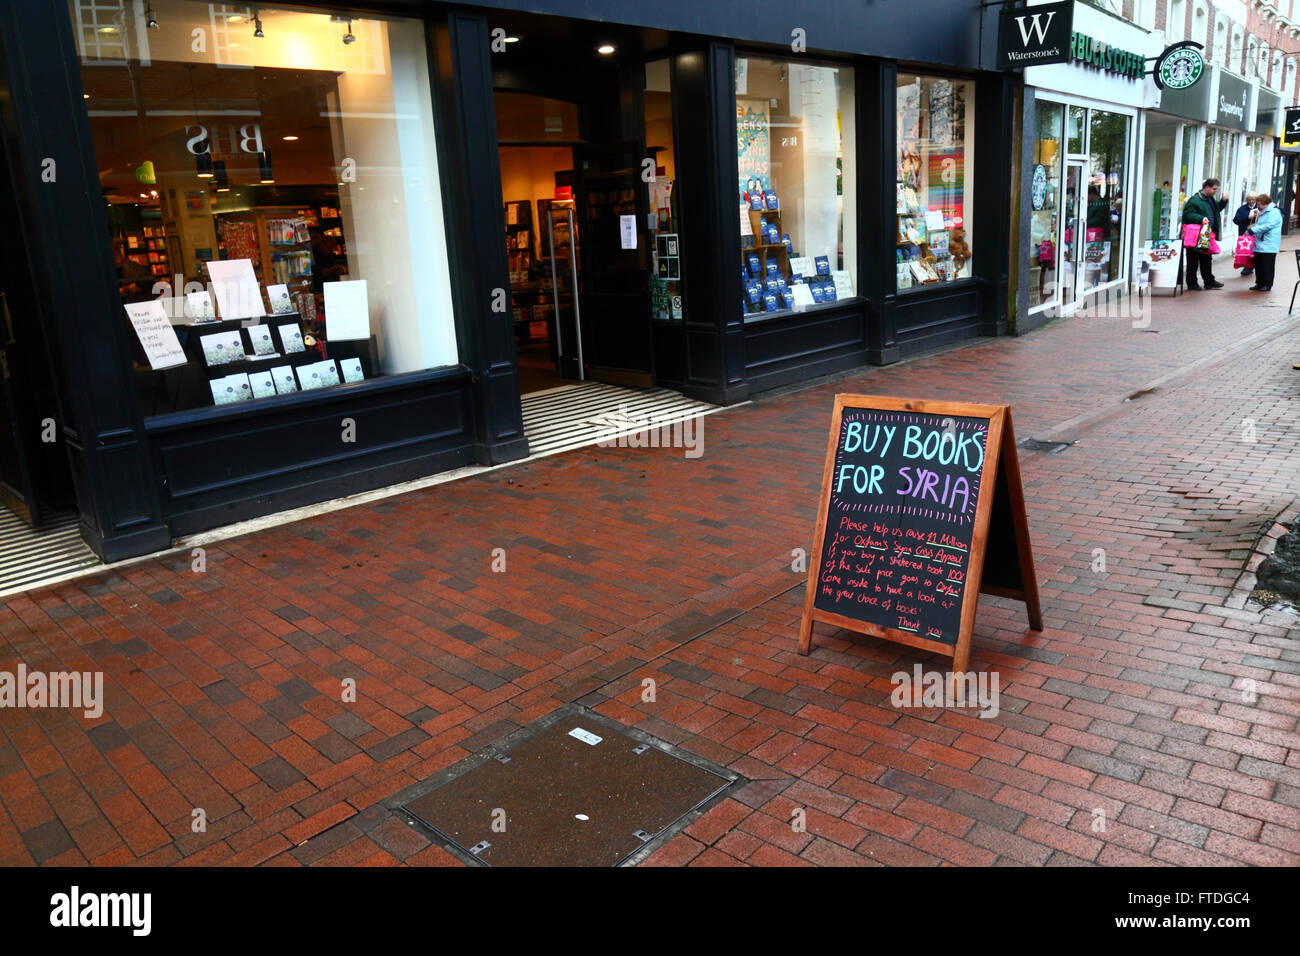 Buy Books for Syria campaign sign outside Waterstones bookshop, Calverley Road, Tunbridge Wells, Kent, England Stock Photo